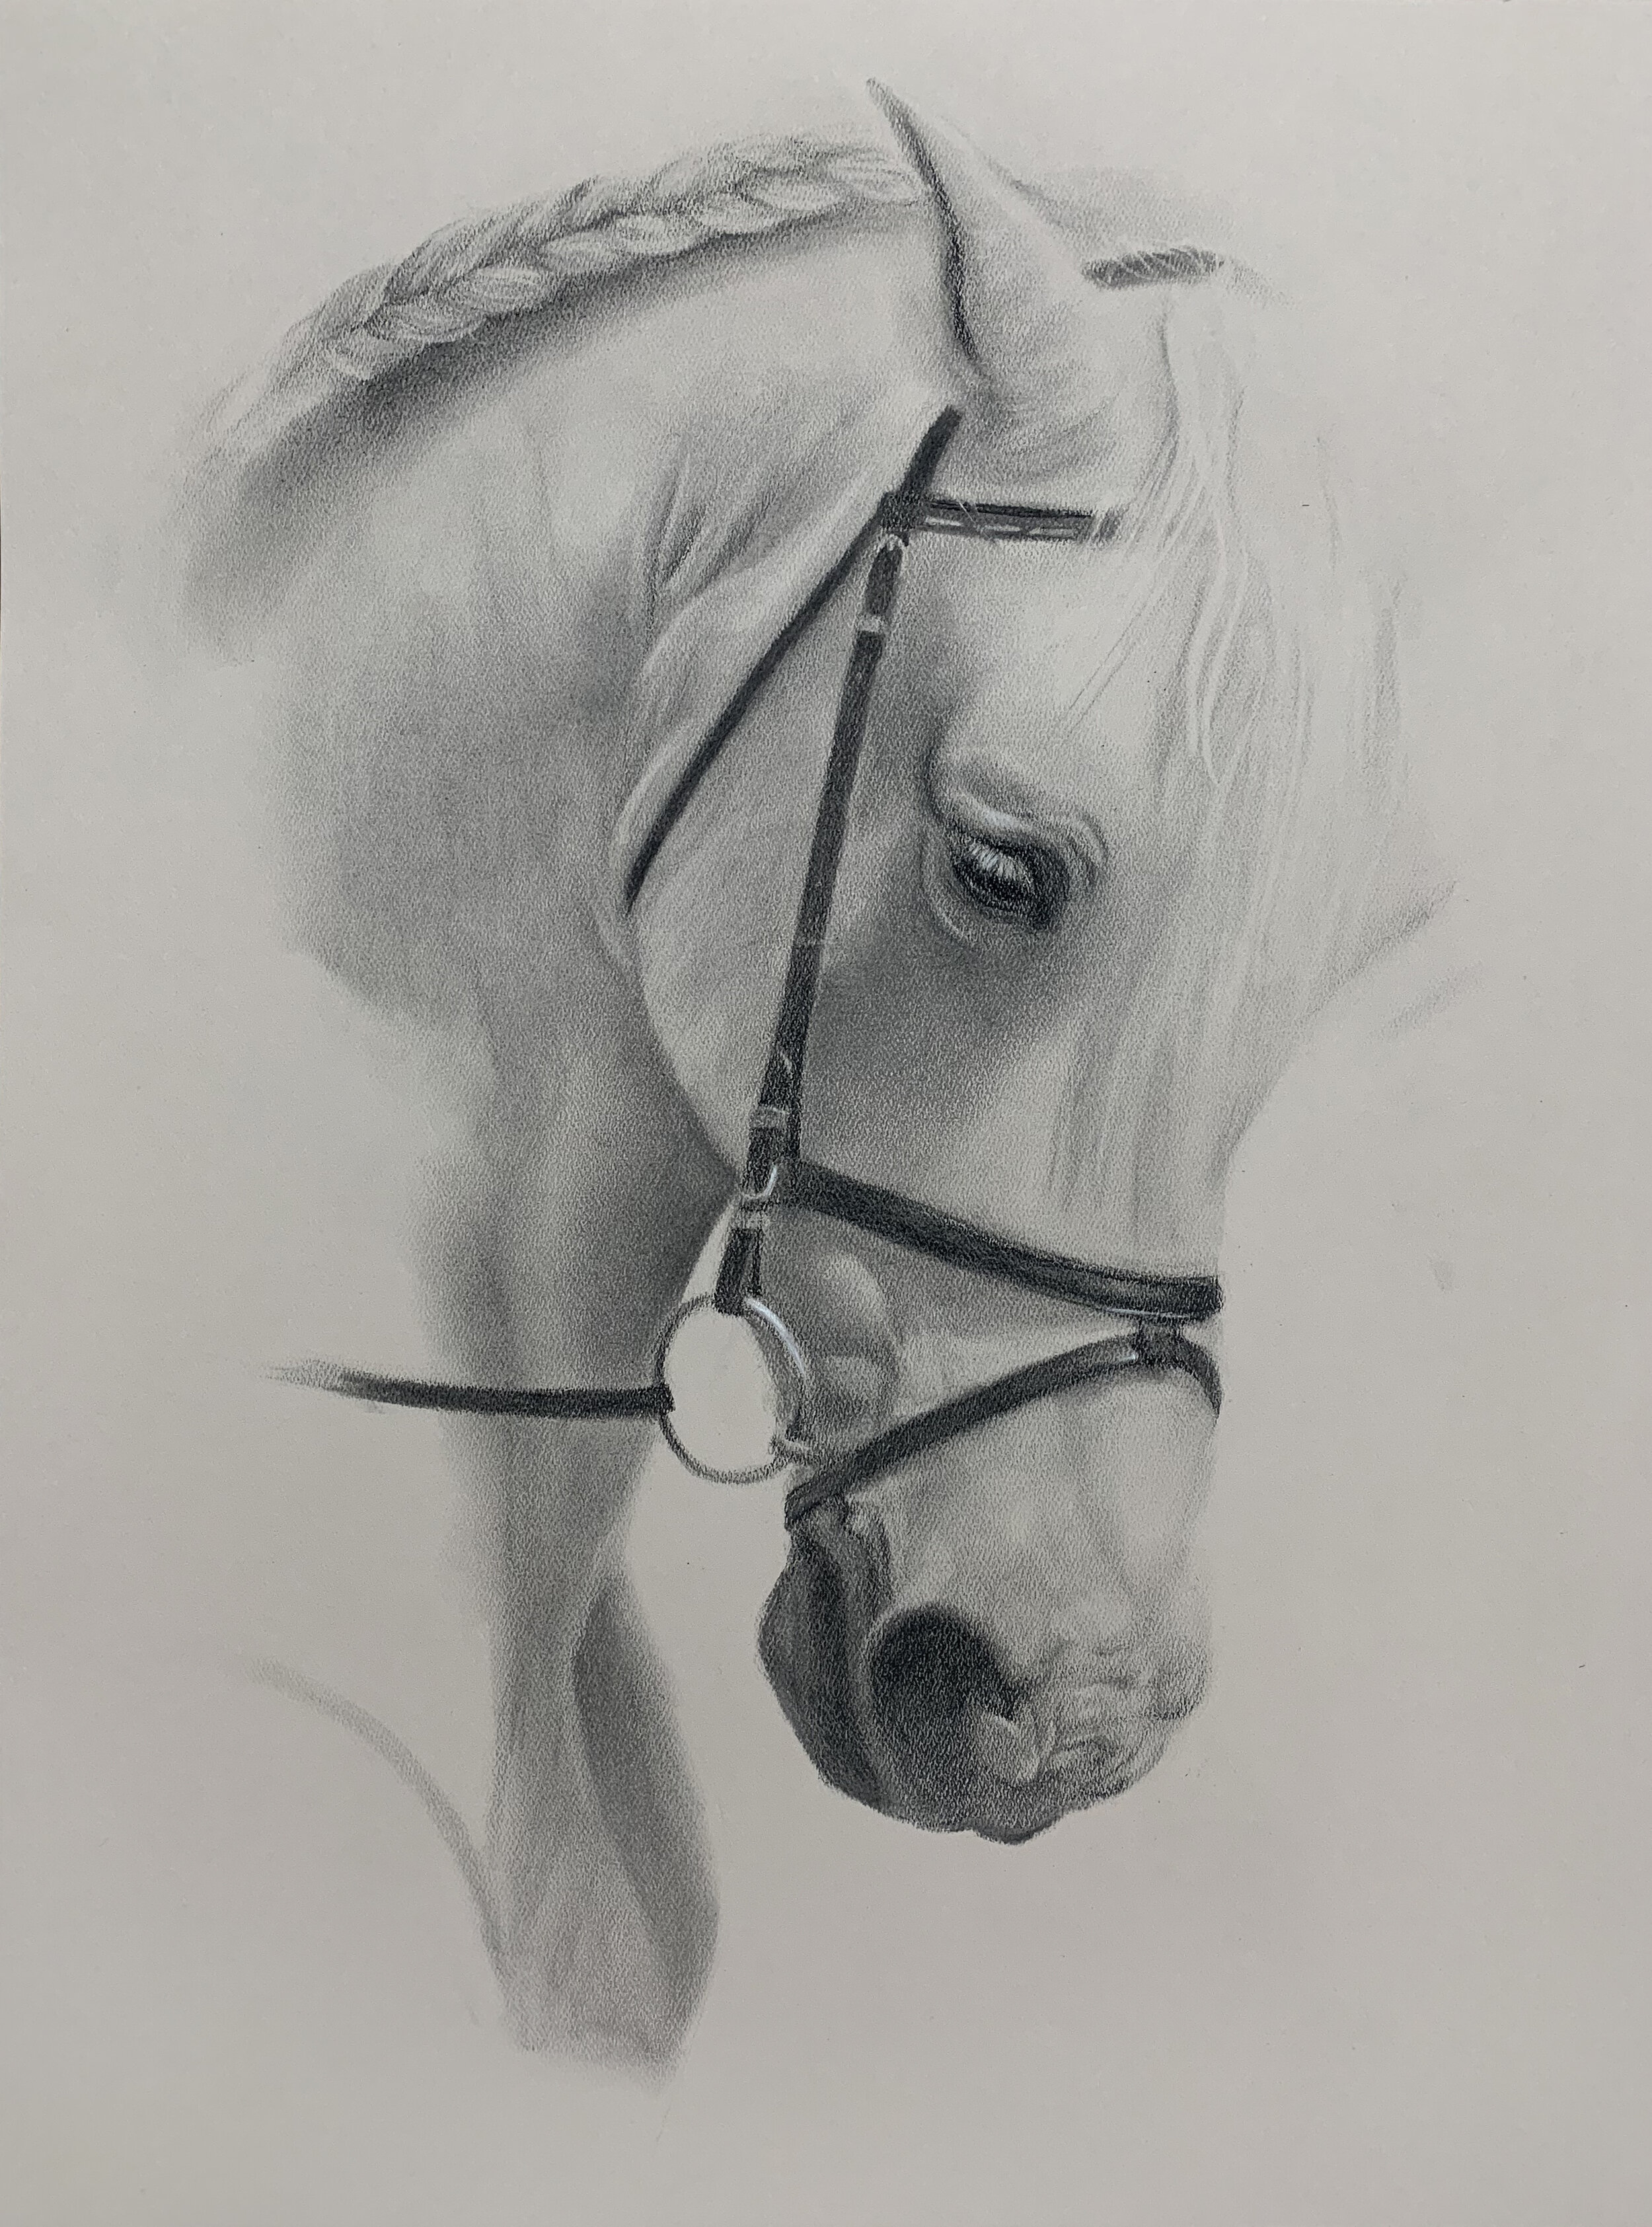   Equine IV   charcoal on paper  24x18 